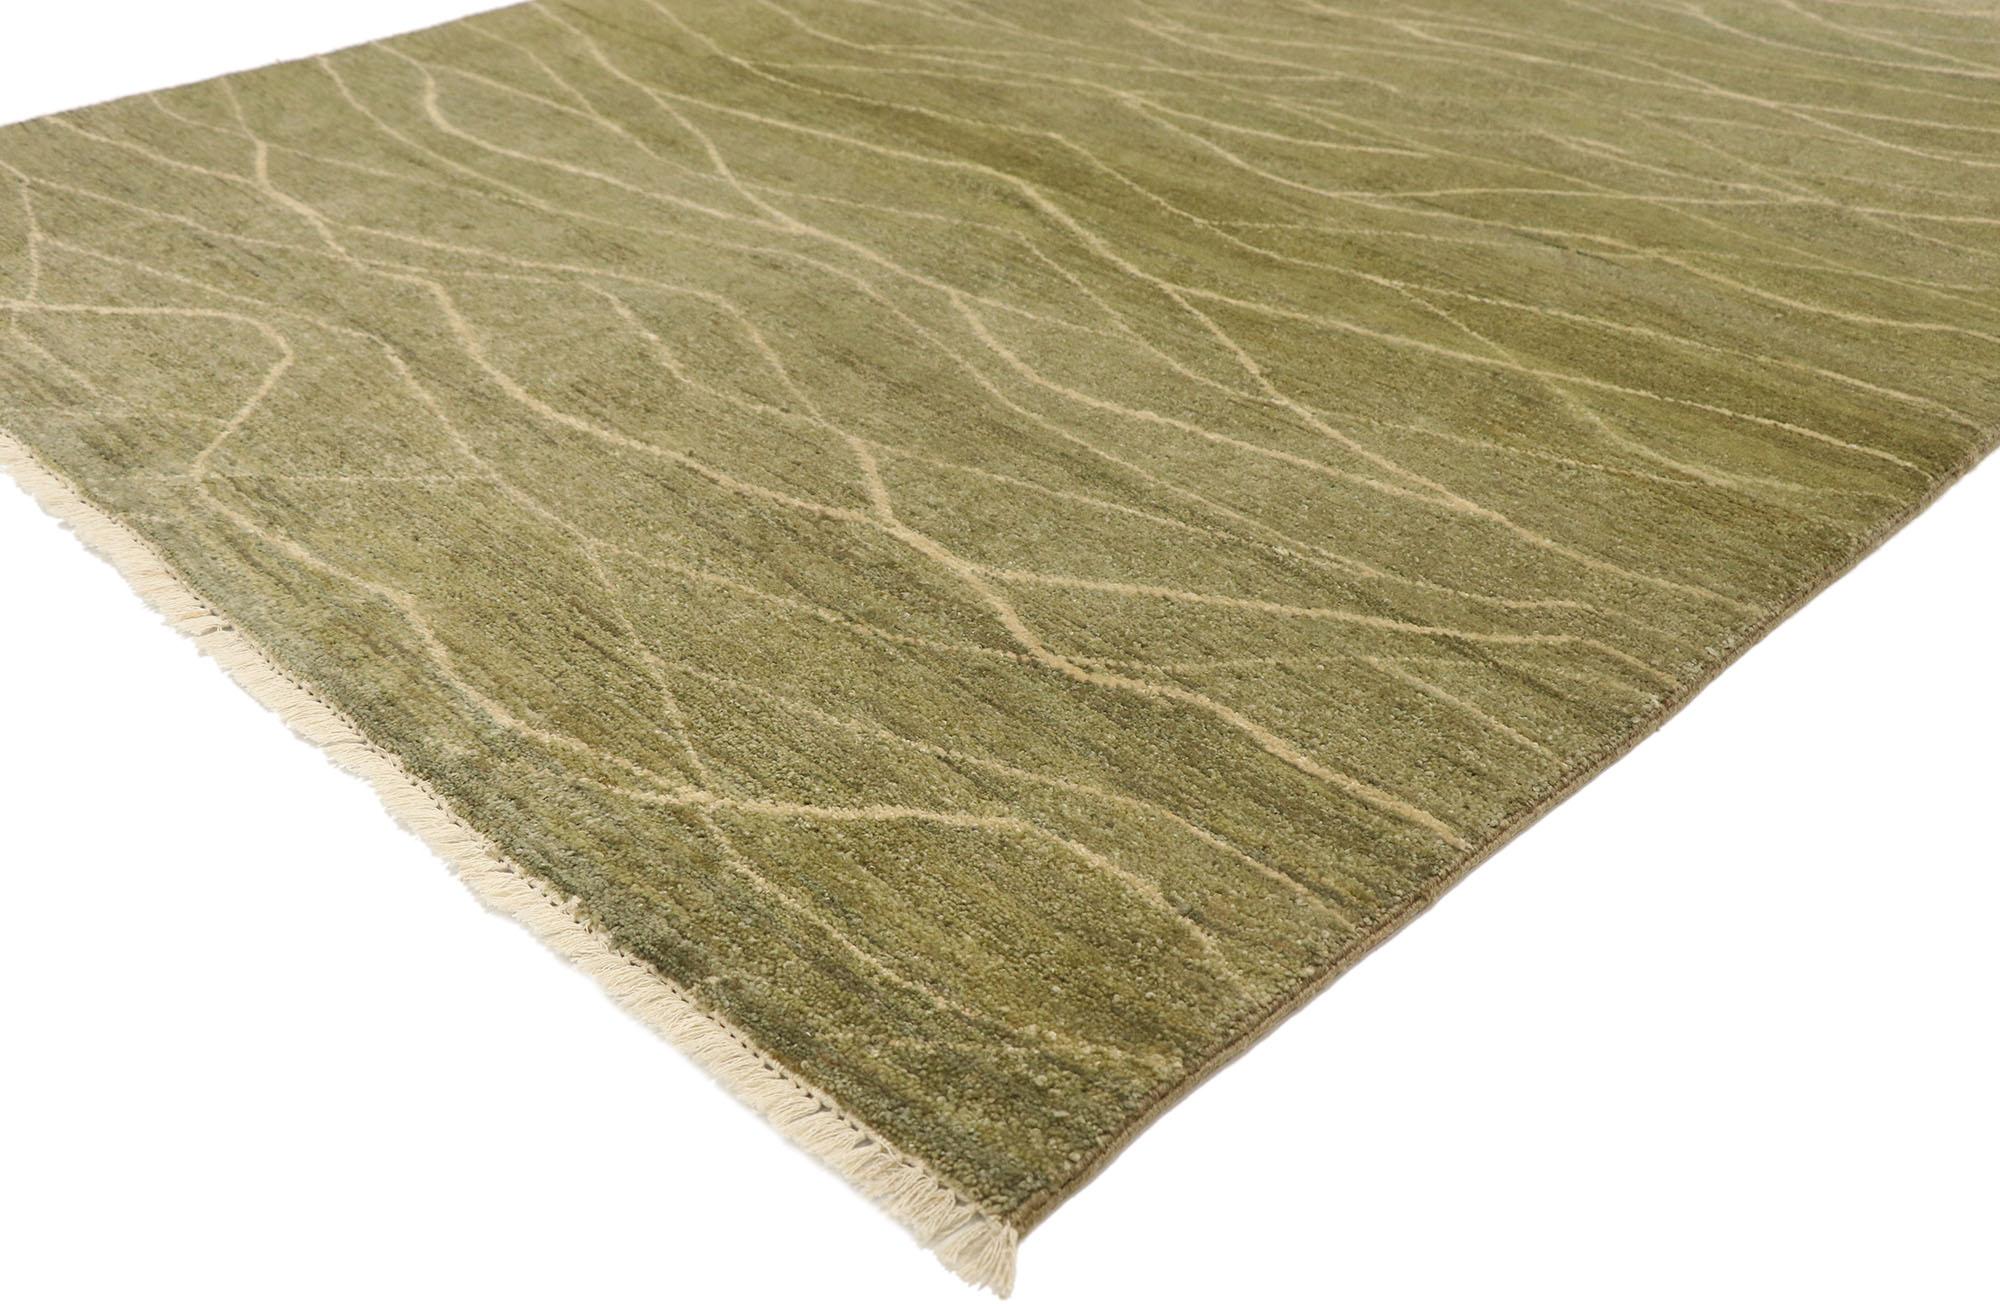 30287 New Transitional Accent rug with Metamorphic Organic Modern style. Effortless beauty and simplicity meet soft, bespoke vibes with an organic modern style in this hand knotted wool transitional accent rug. The Metamorphic marble veins